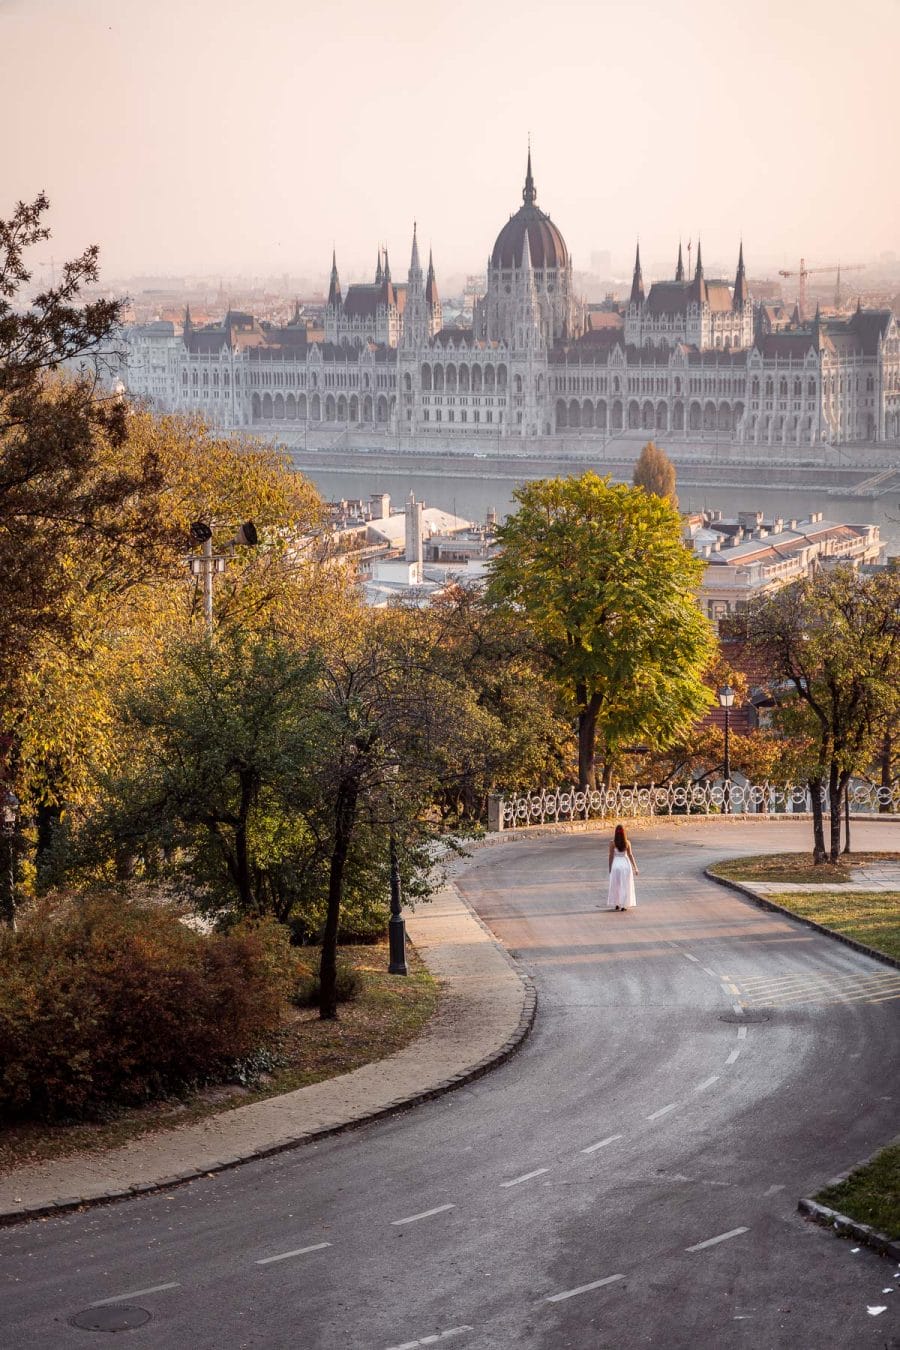 View of the Hungarian Parliament from the Fisherman's Bastion in Budapest